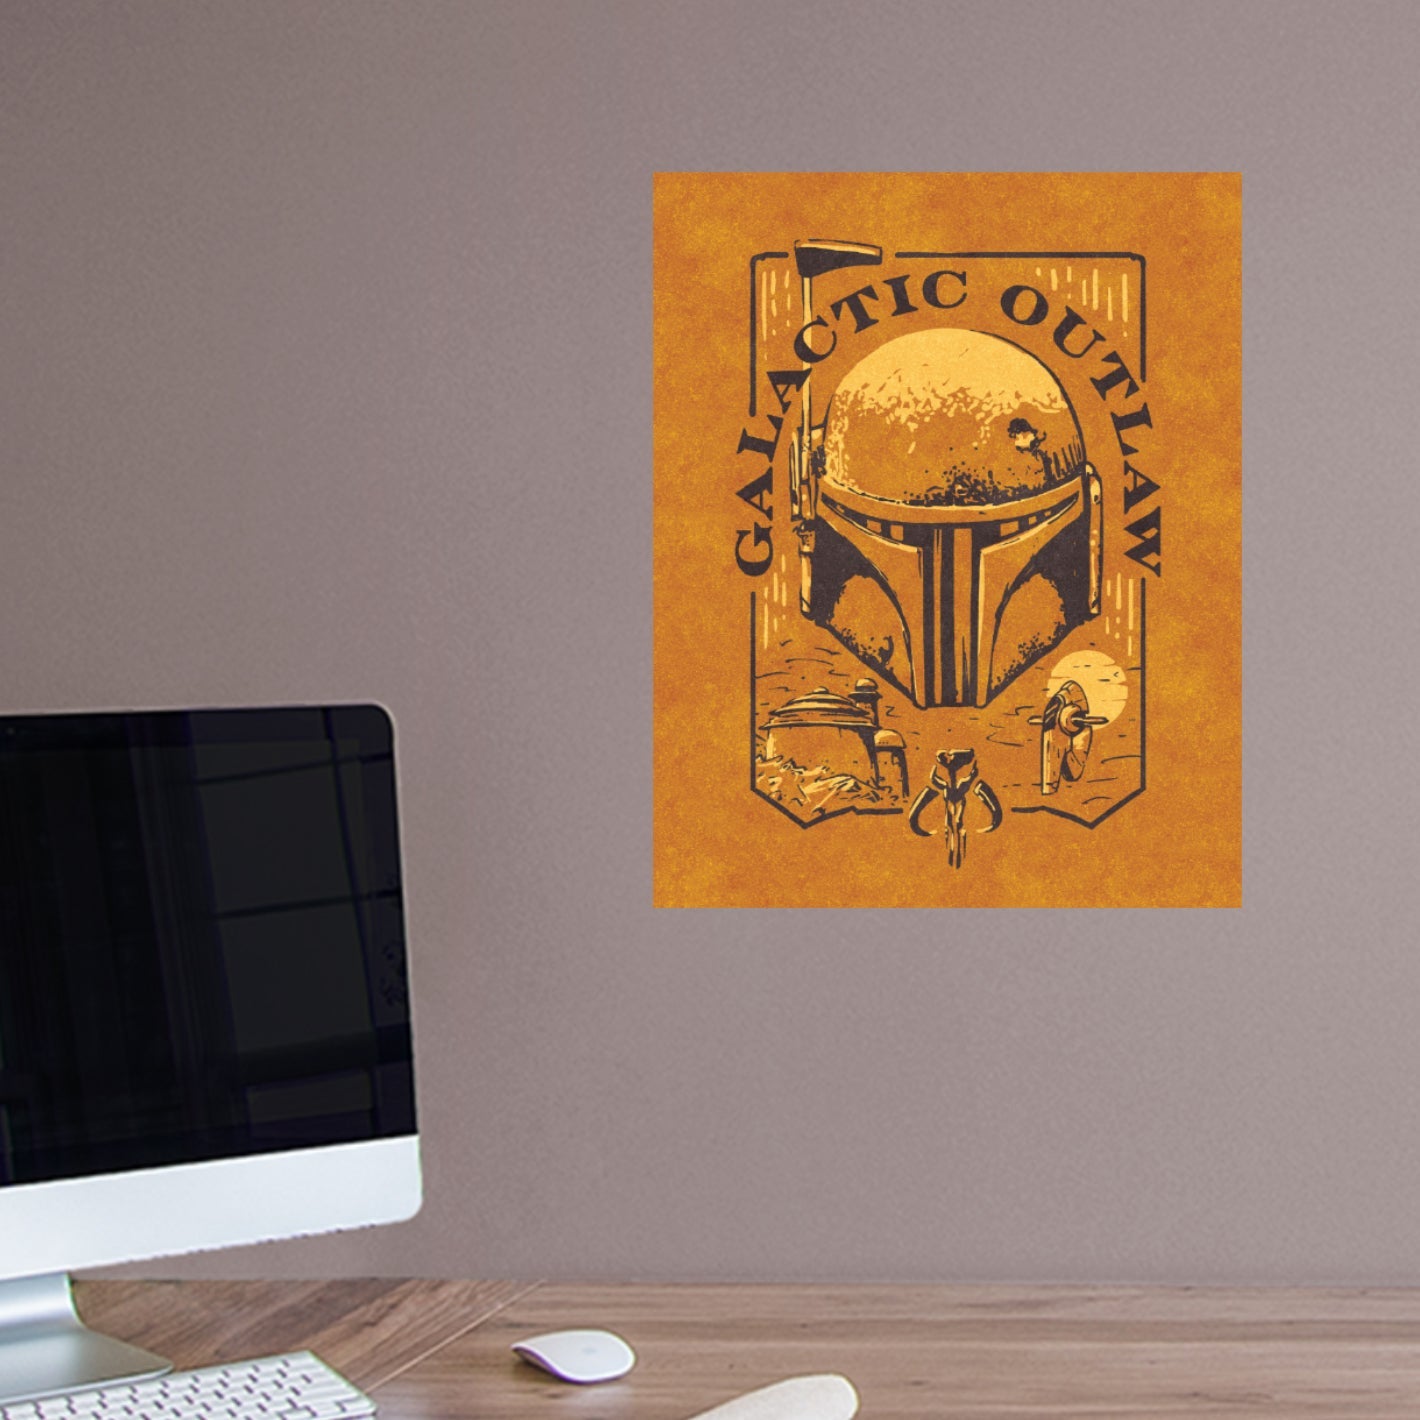 Book of Boba Fett: Boba Fett Galactic Outlaw Badge Poster - Officially Licensed Star Wars Removable Adhesive Decal